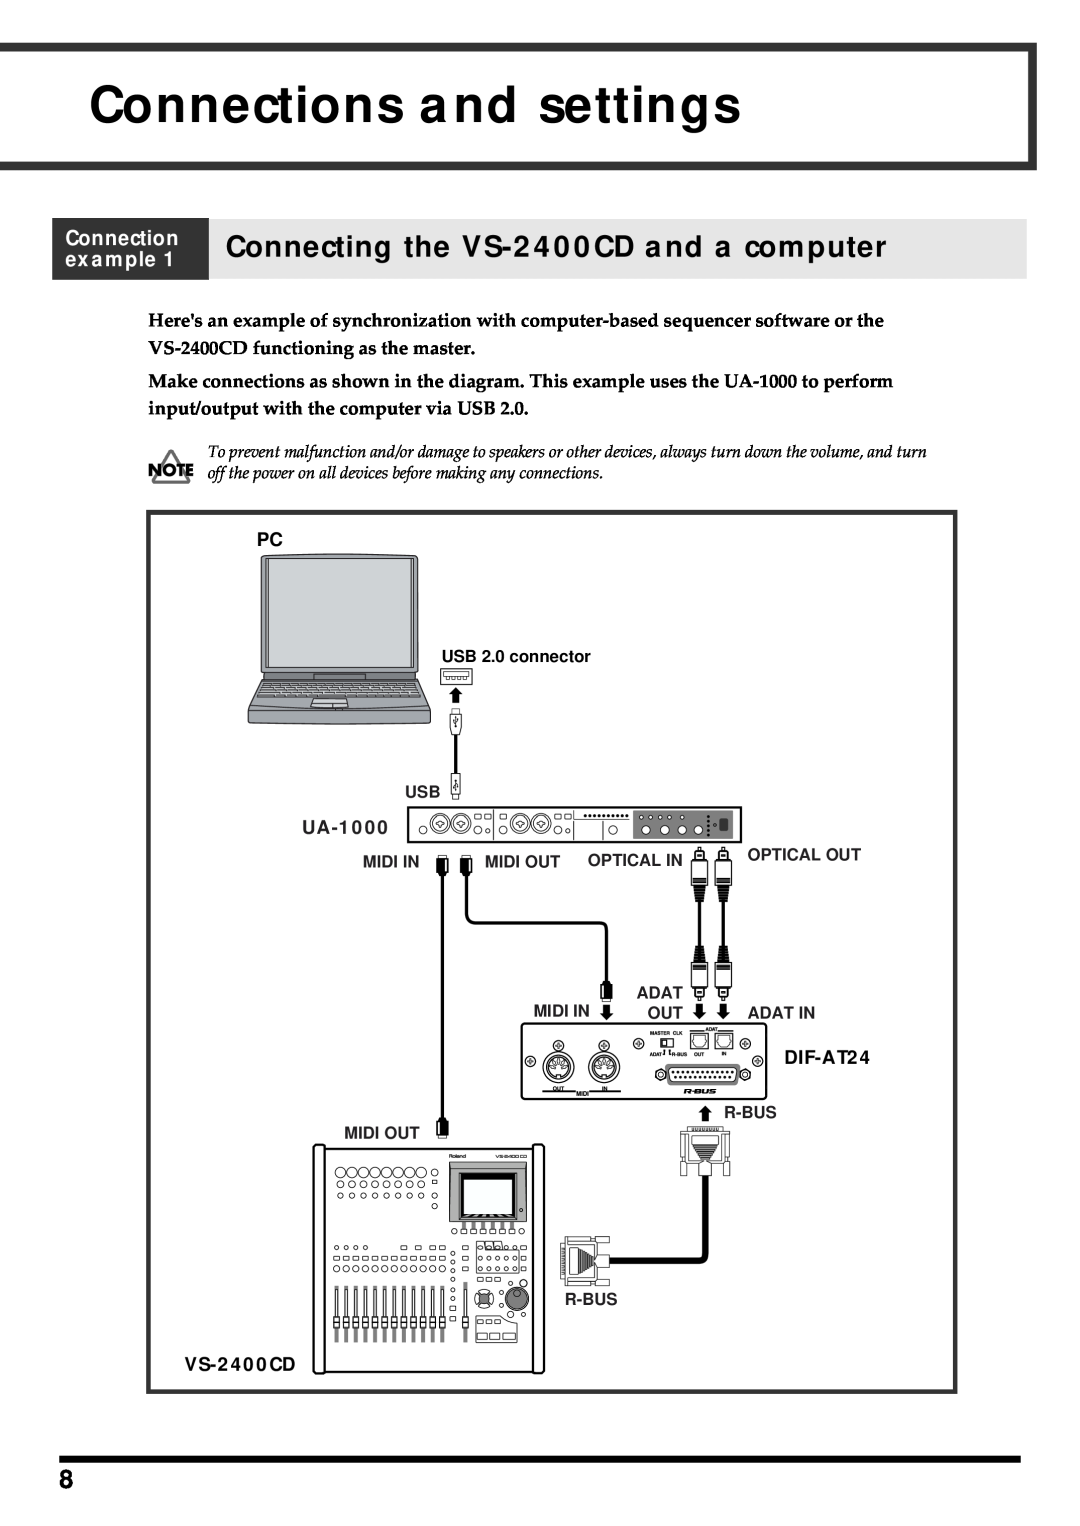 Roland DIF-AT24 owner manual Connections and settings, Connecting the VS-2400CD and a computer, Connection example, UA-1000 